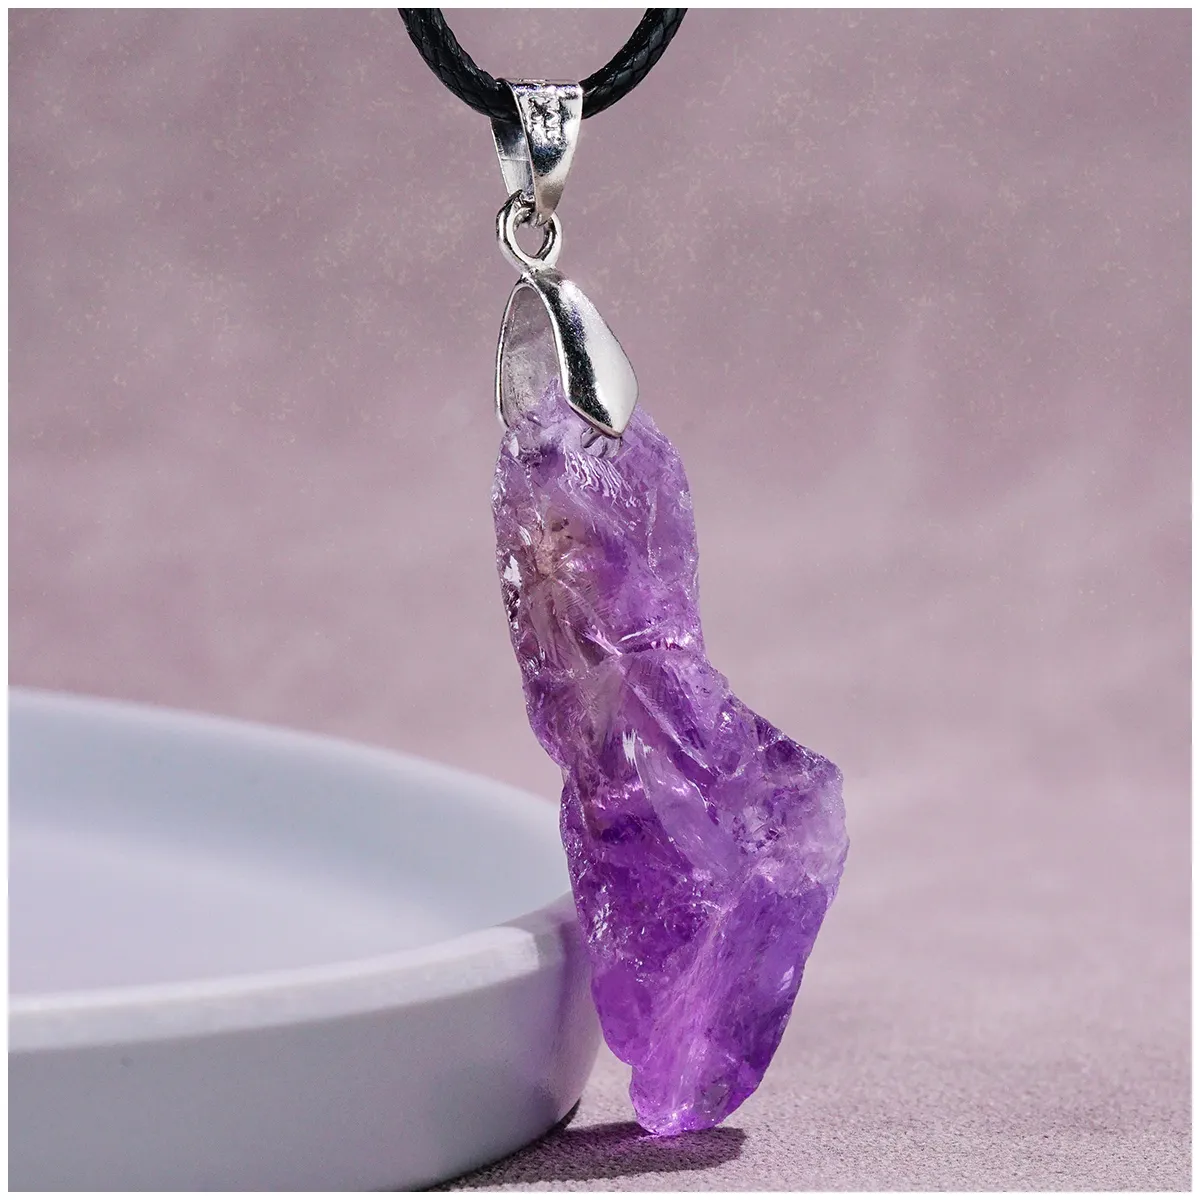 QTY 2 Kyber Crystal Necklace stone Pendant your choice of 2 w/elastic Cord  NEW | eBay